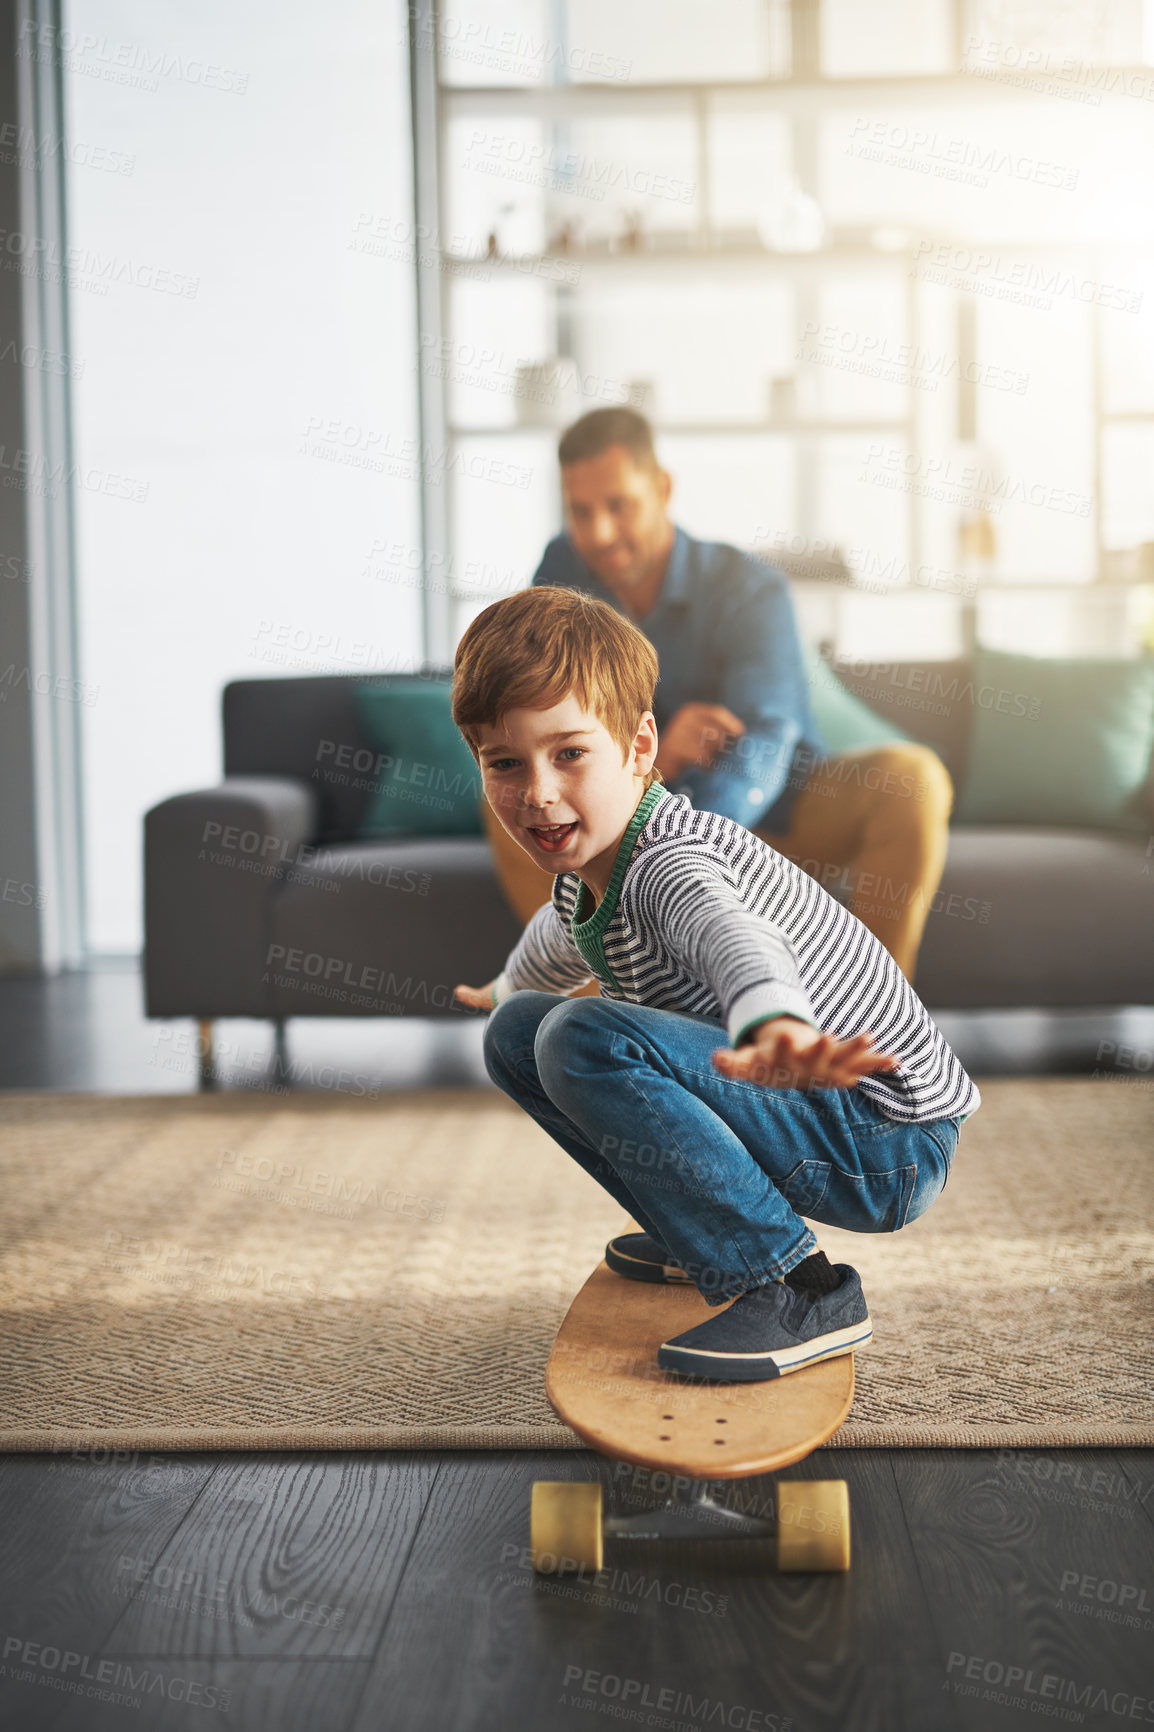 Buy stock photo Shot of a cheerful little boy riding on a surfboard in the middle of the living room at home